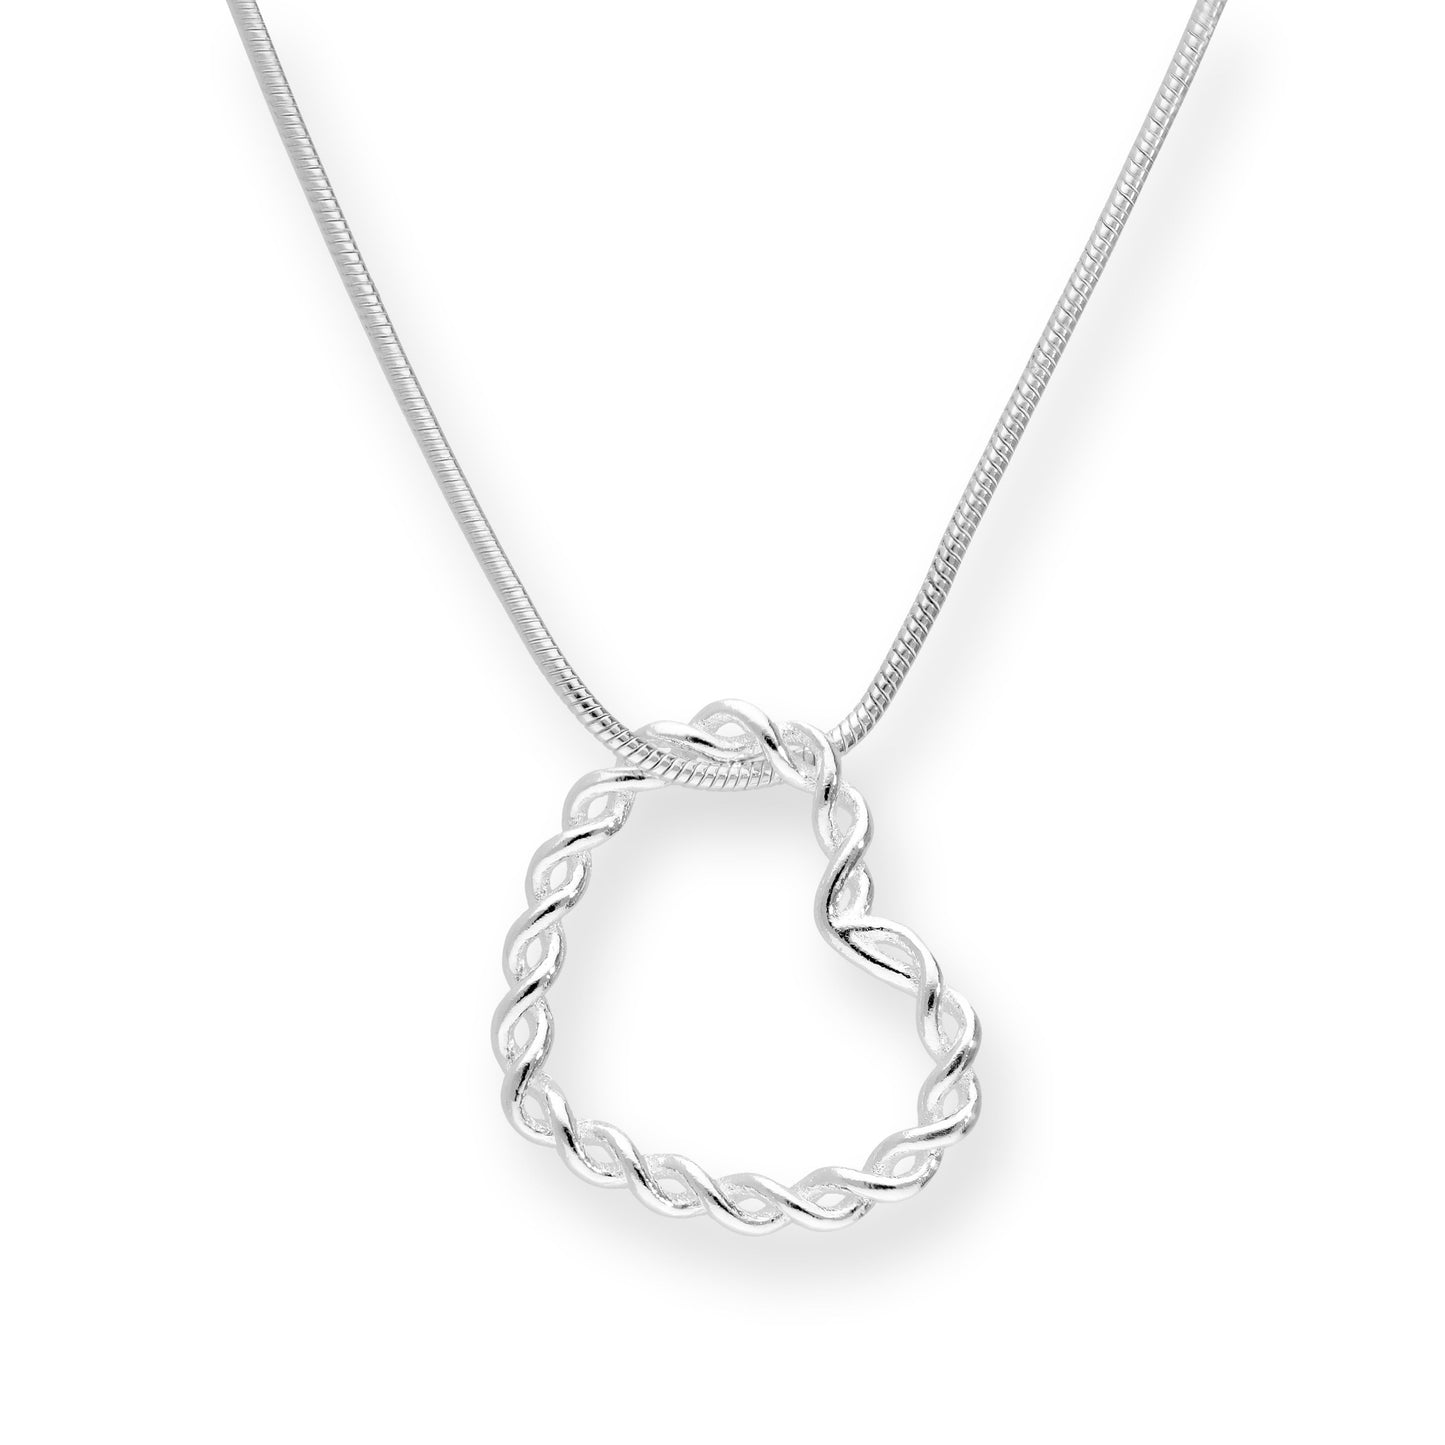 Sterling Silver Twisted Floating Heart Pendant Necklace